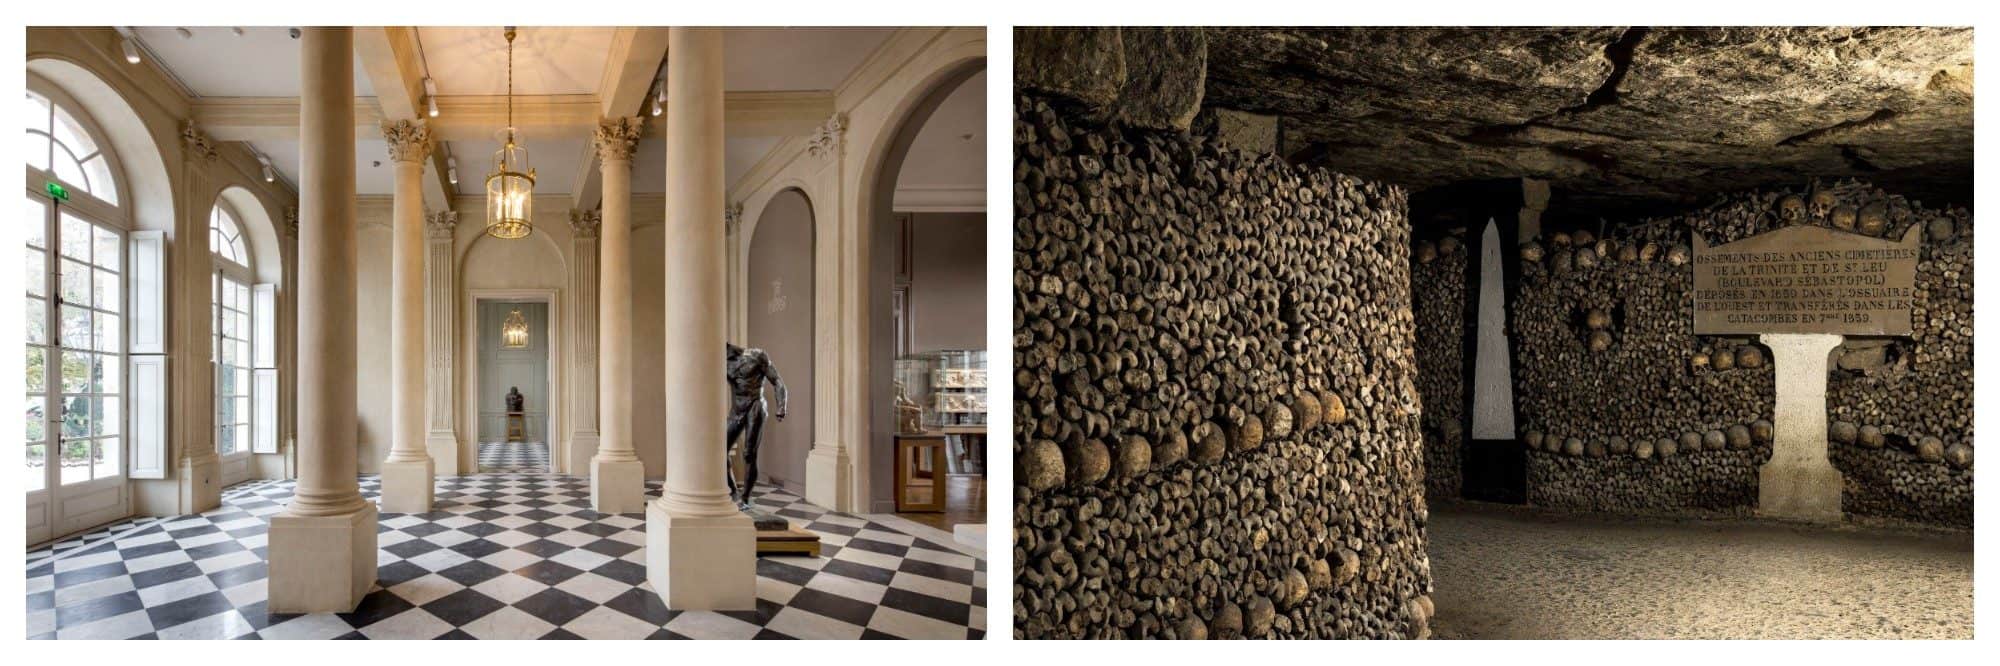 The interior of the Musée Rodin in Paris with pillars and black and white tiles. A wall of skulls and an plaque with an inscription at the catacombs in Paris.